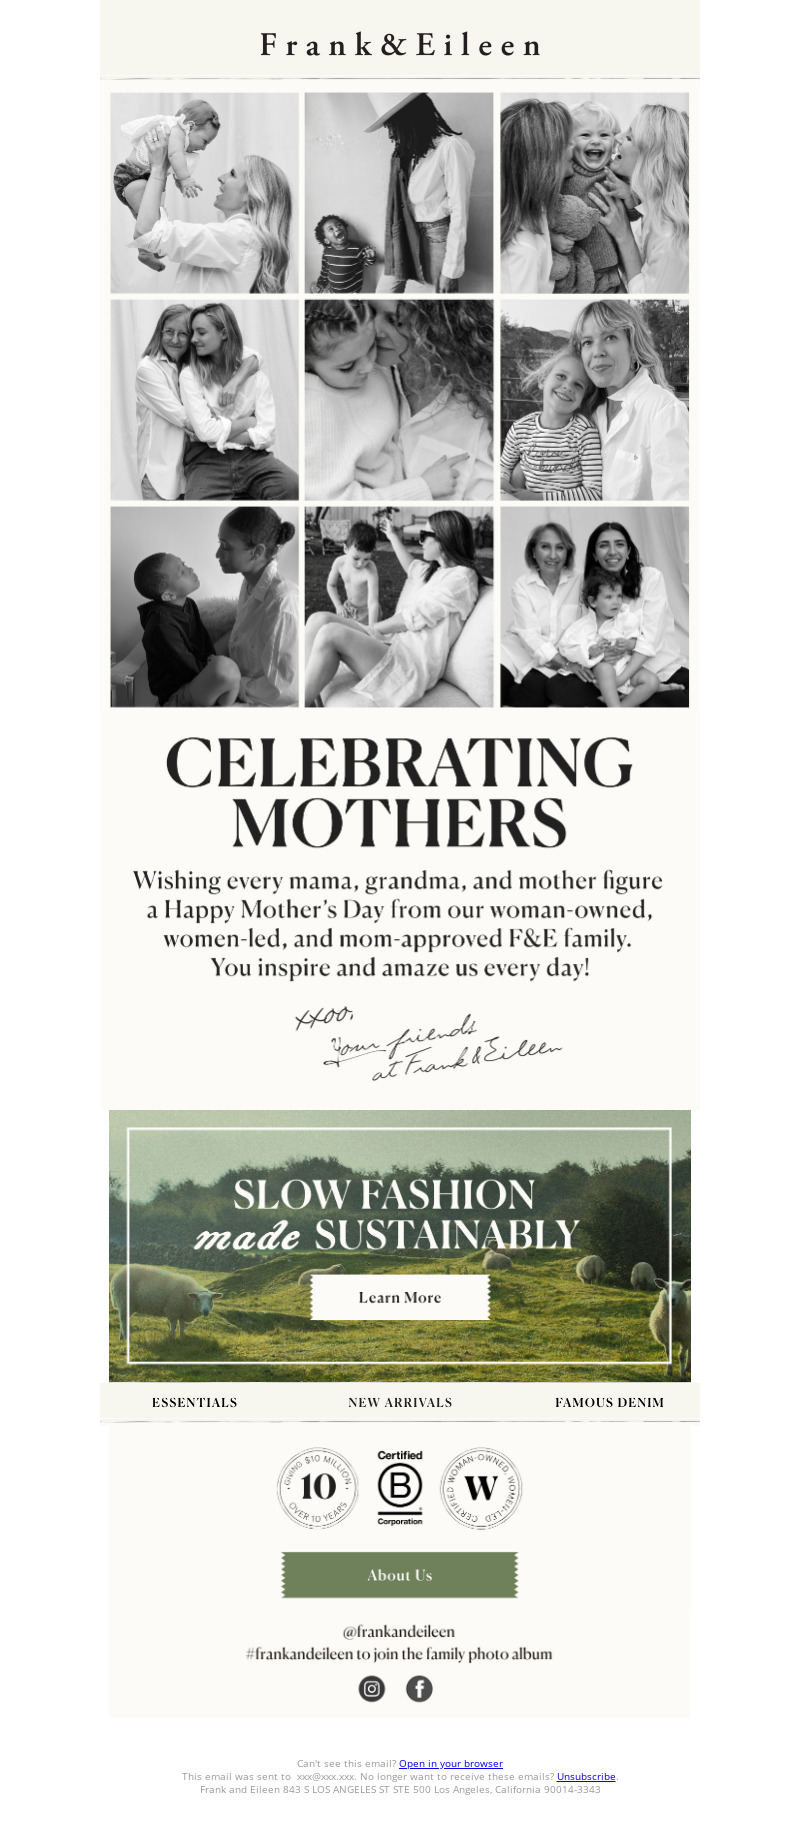 email marketing campaign for Mother's Day